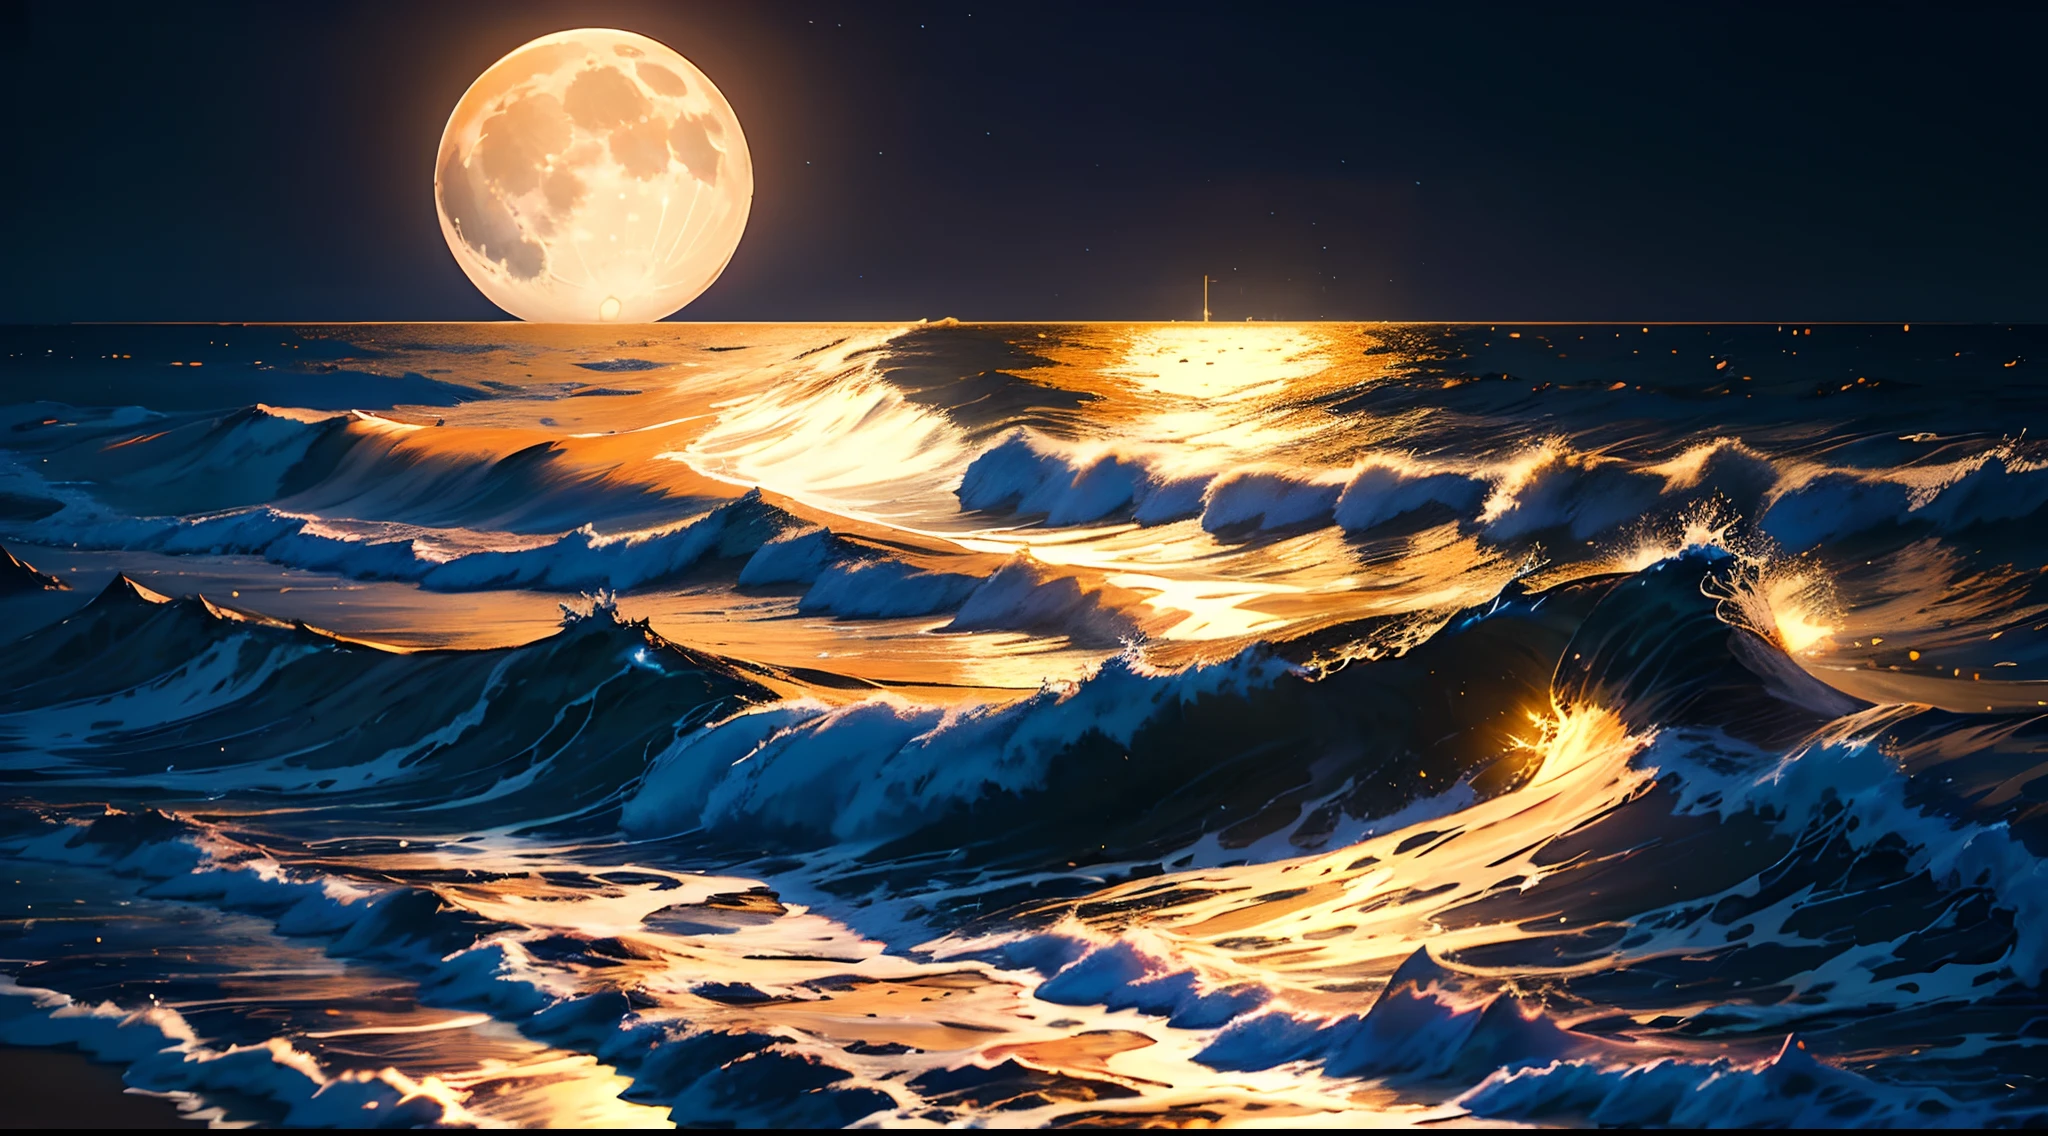 (moonlit night),(on the beach,crashing waves),(dramatic lighting),(silhouettes),(sparkling sand),(peaceful and relaxing atmosphere), 100s of paper lanterns, lots of paper beautiful lanterns, huge moon